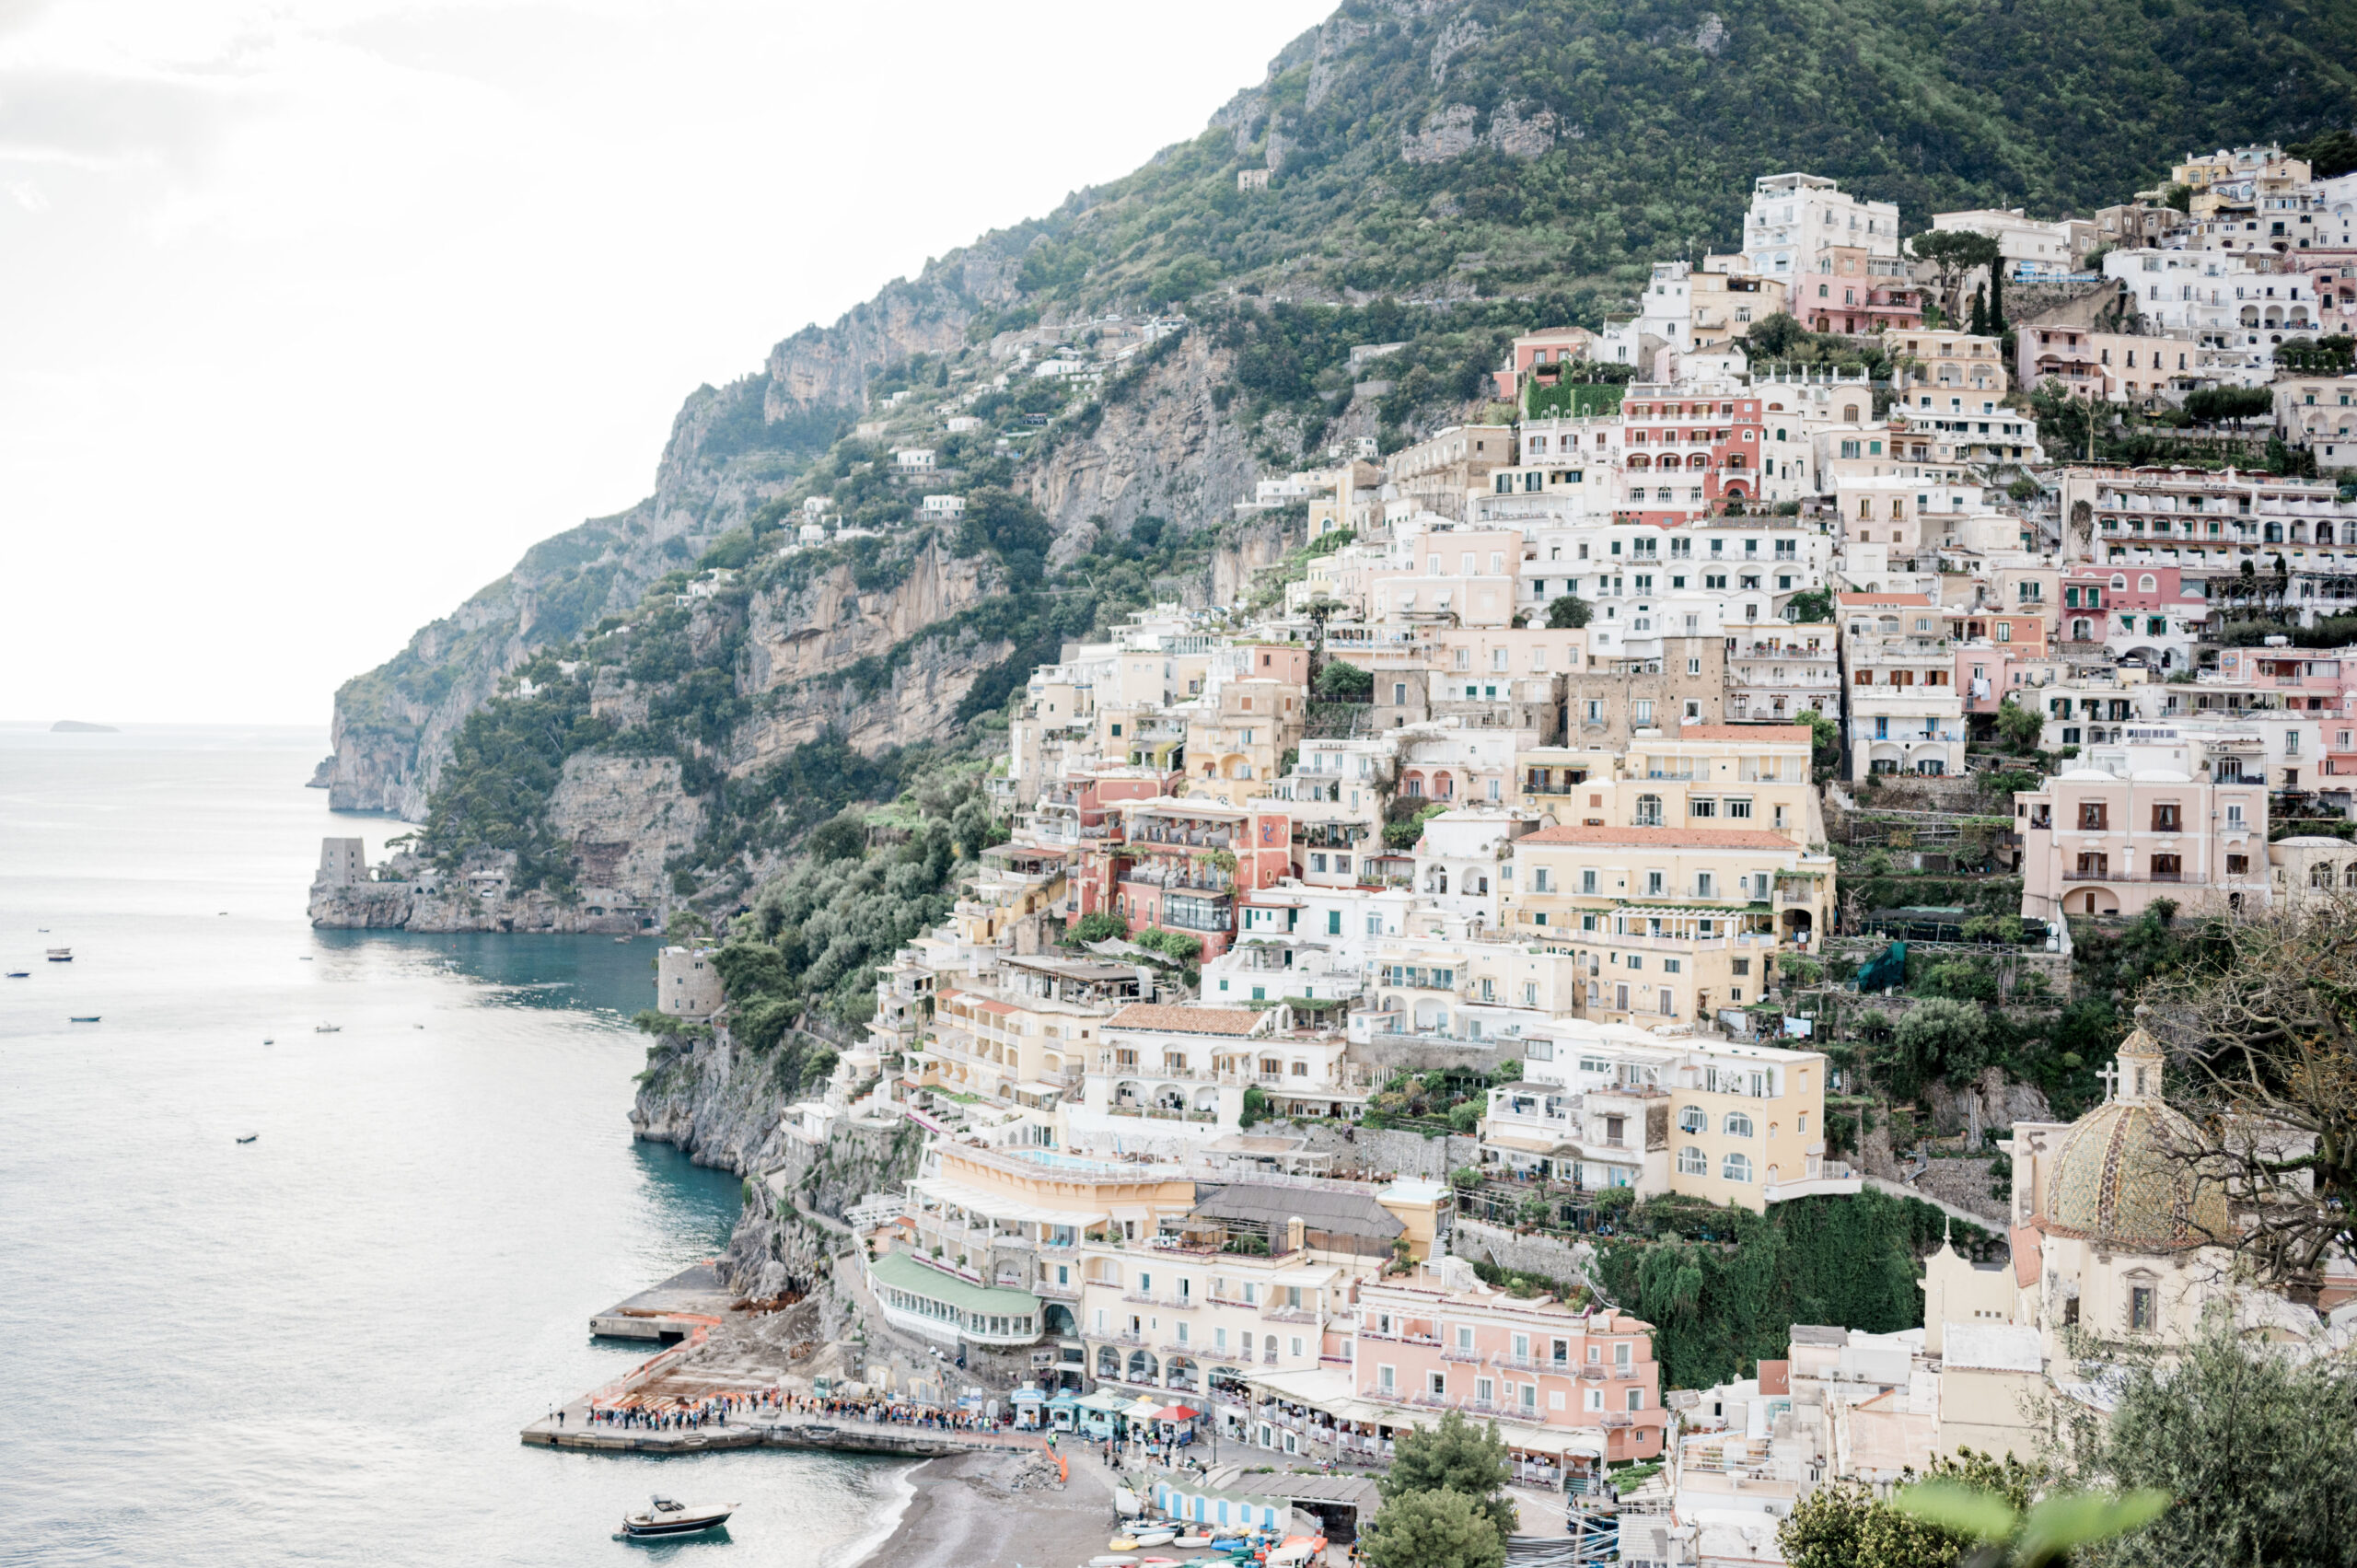 A view of Positano from afar, tips & tricks for traveling to Italy